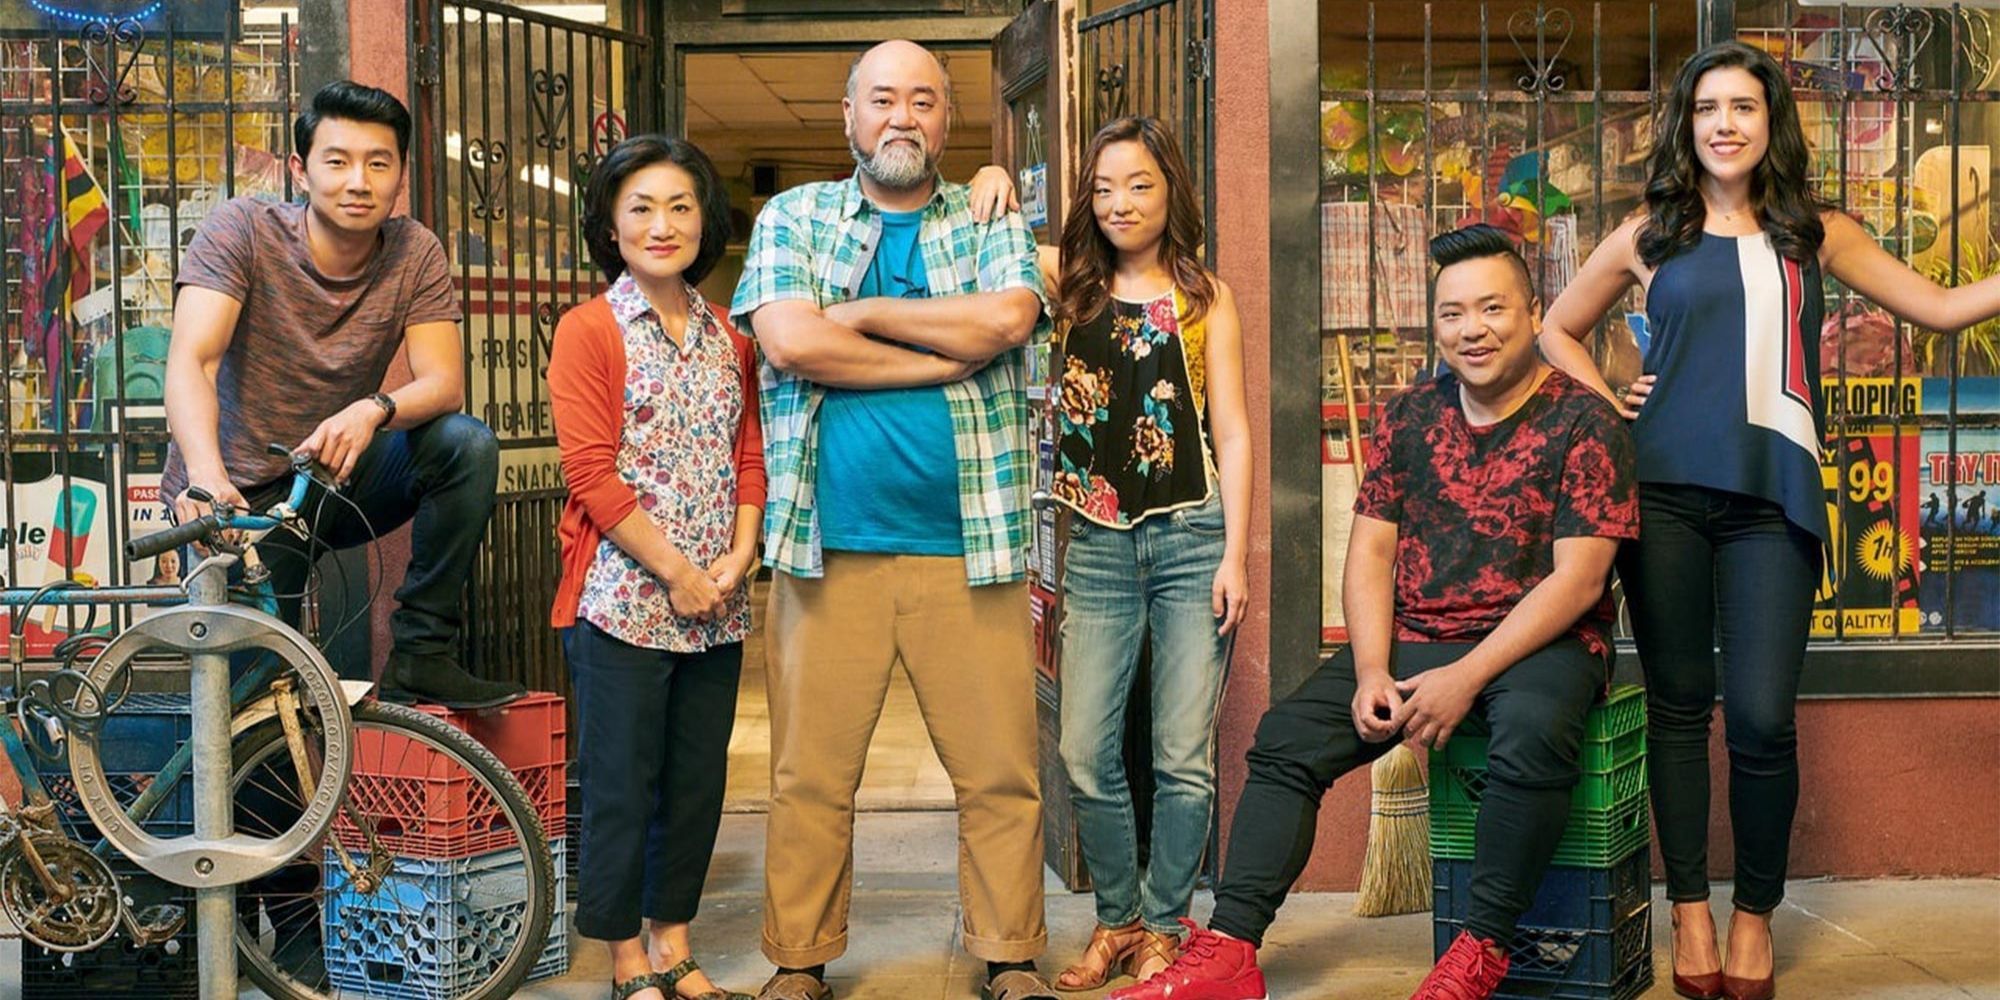 The cast of Kim's Convenience standing together